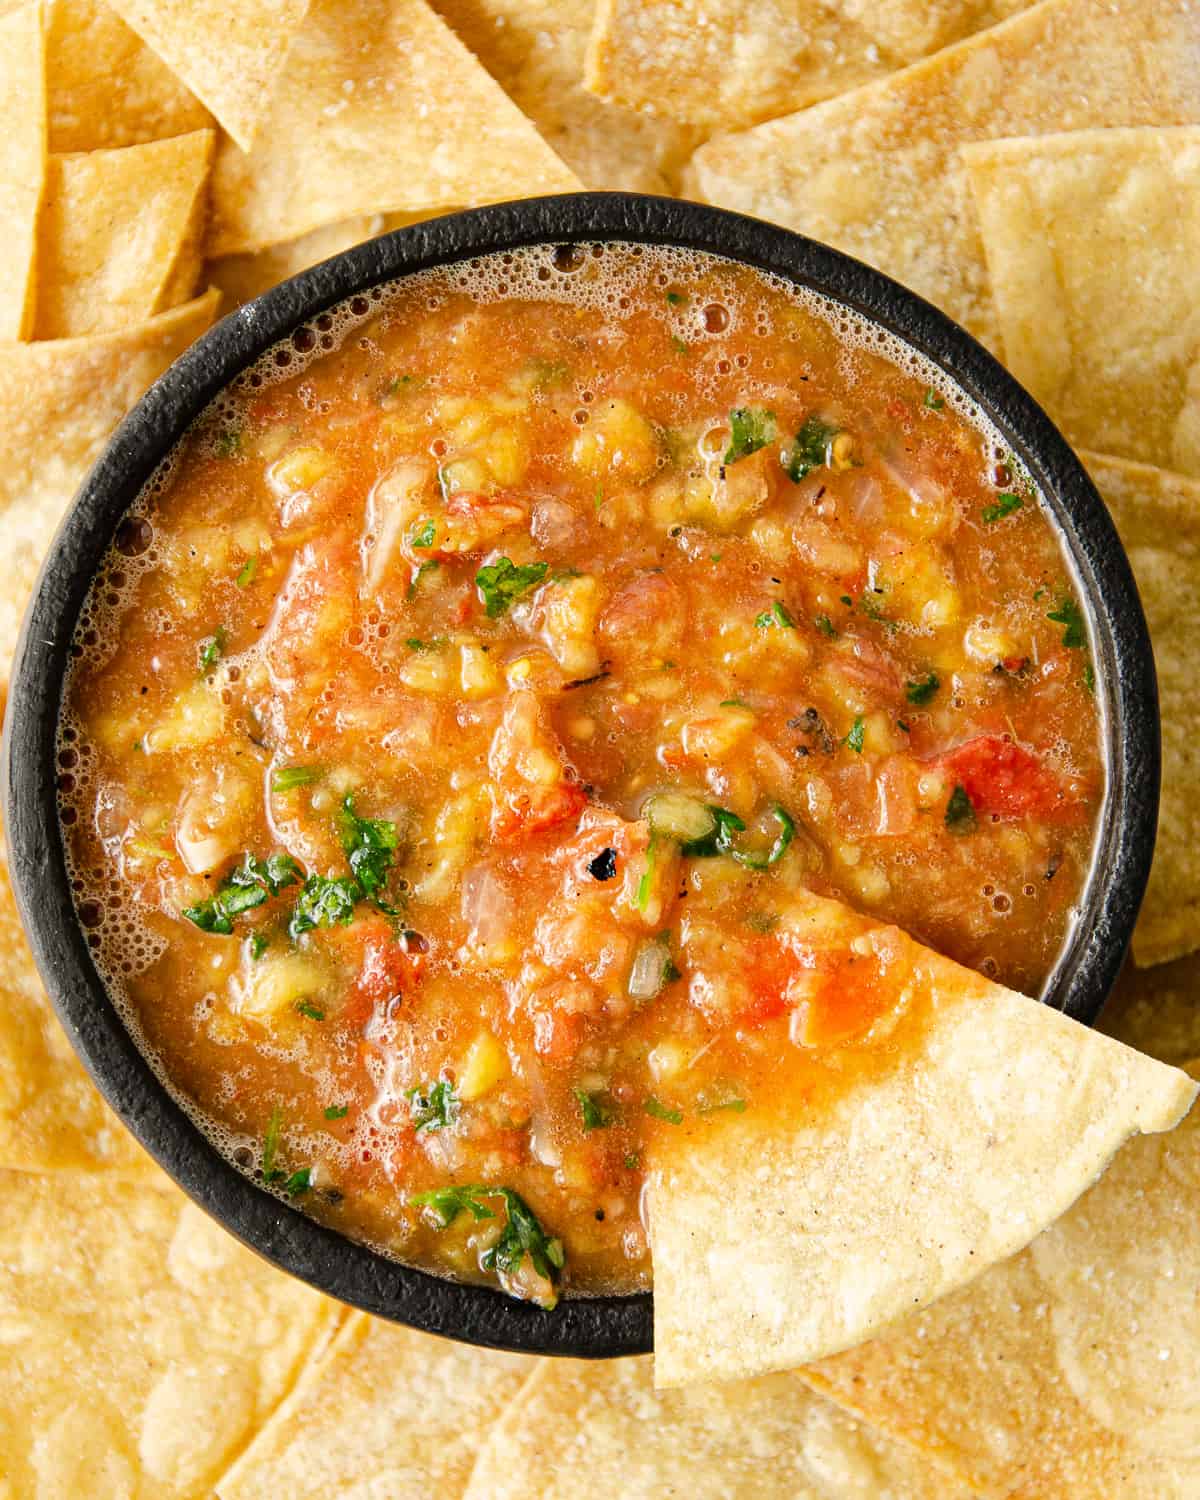 A brightly colored red and orange mango habanero salsa in a molcajete surrounded by tortilla chips.